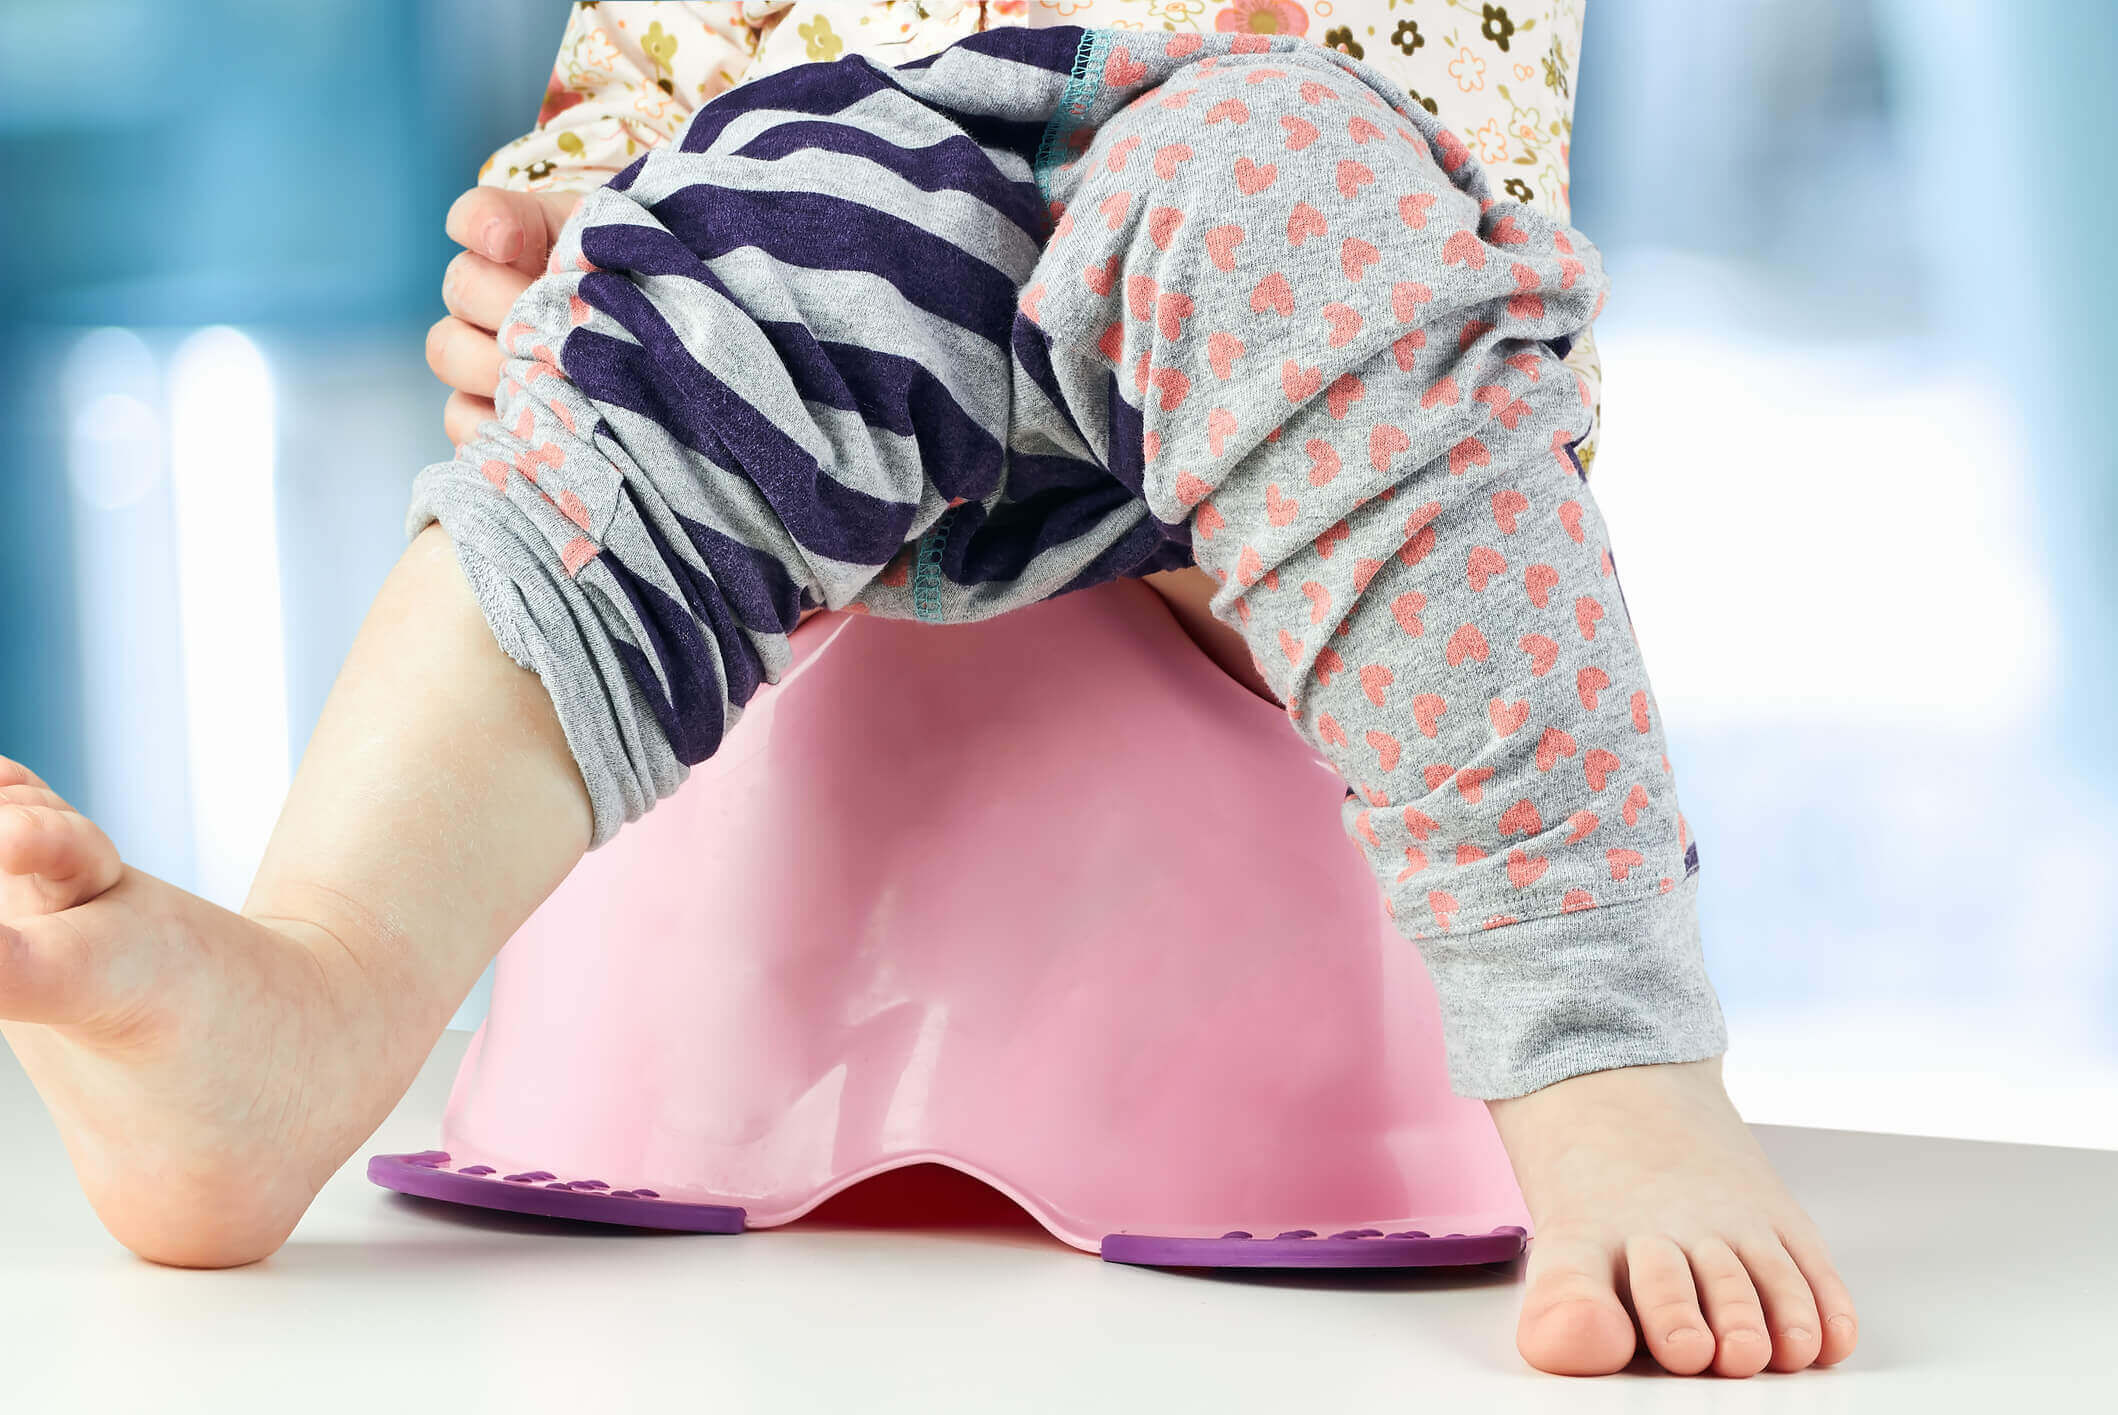 Baby Centre article - Time to Potty Train